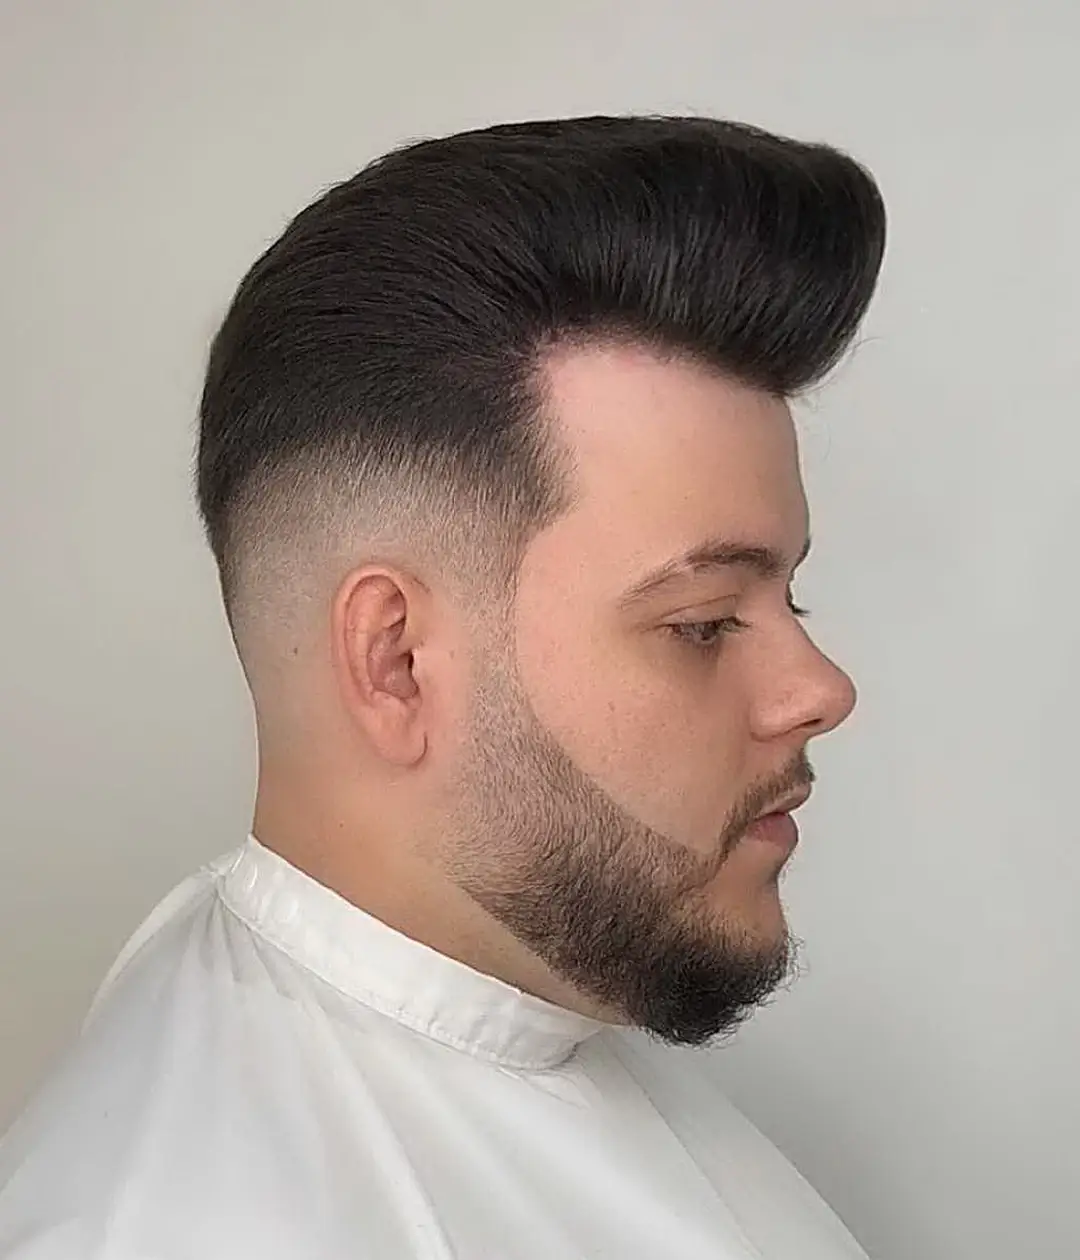 Men's Flat Top Haircut with Pompadour from Fifth Ave Barber Shop in Midtown NYC